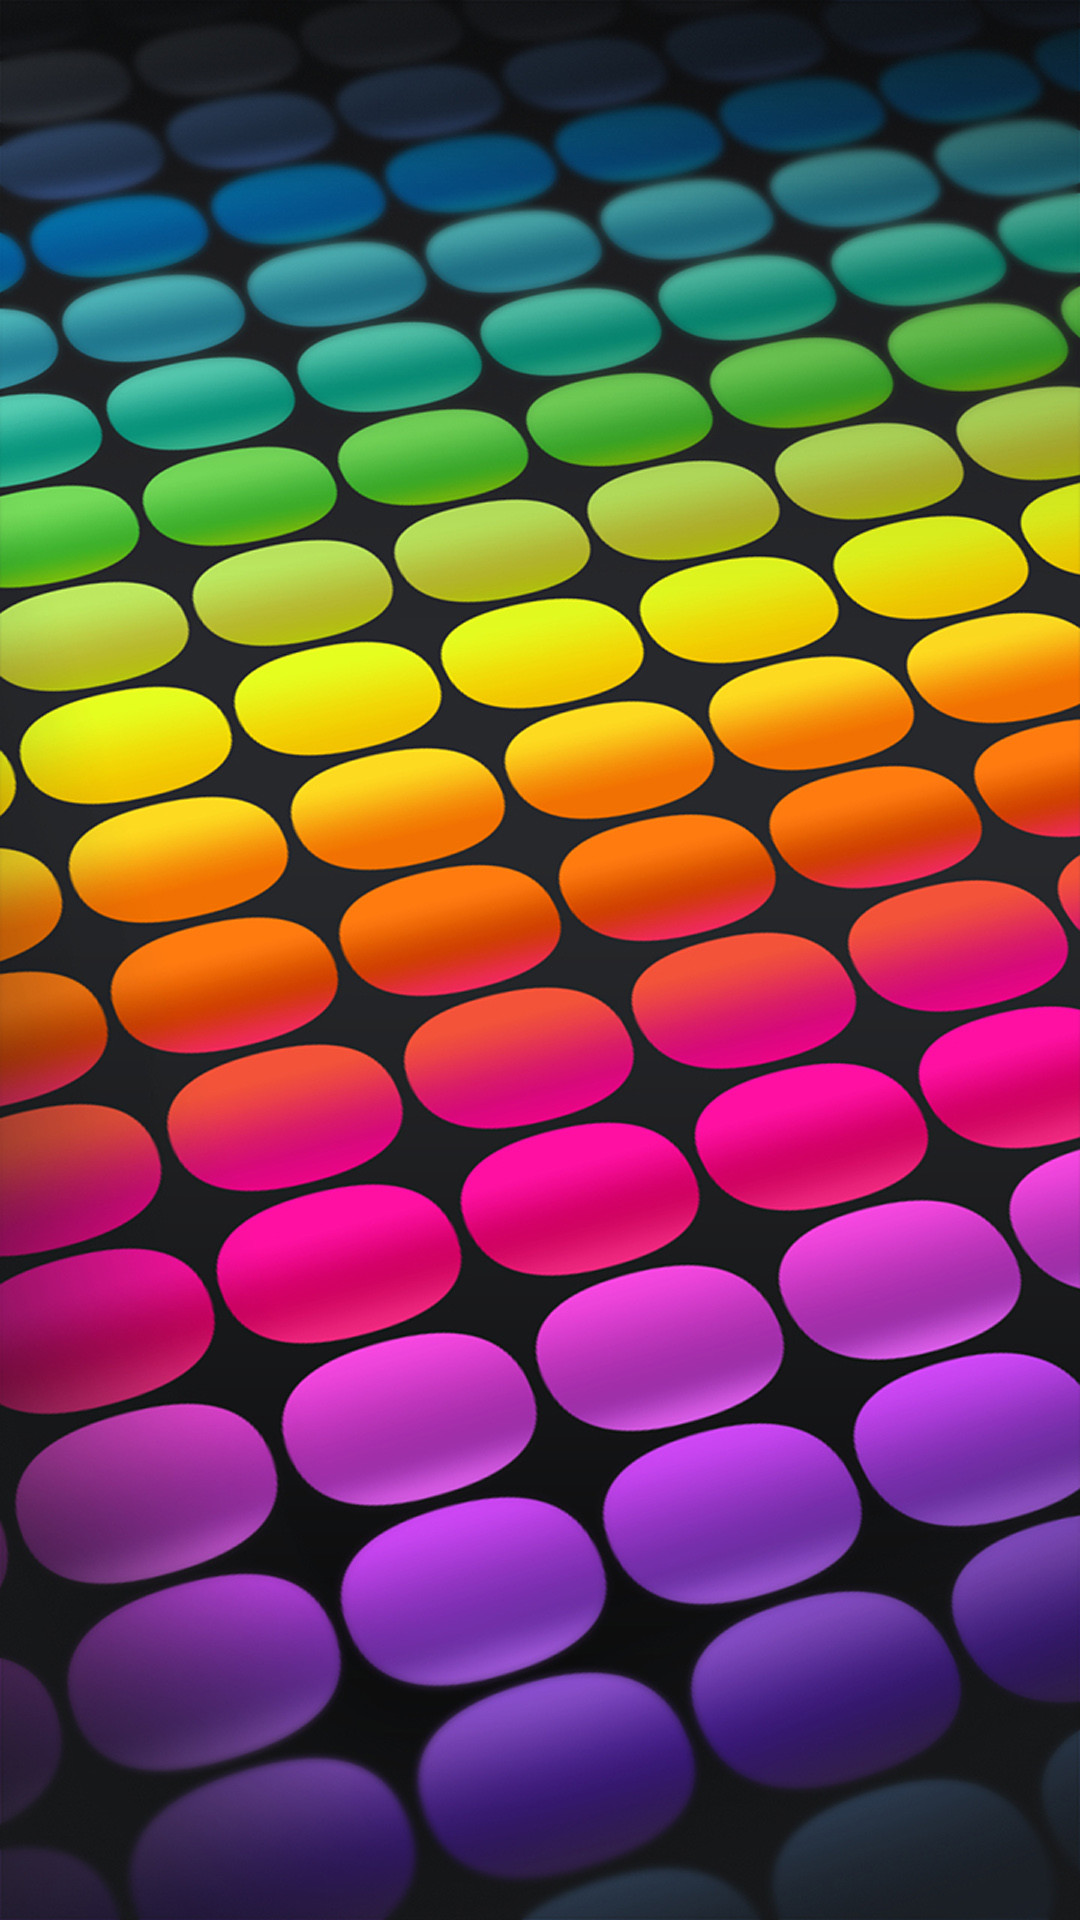 1080x1920 Colored dots iphone 6 plus wallpaper.